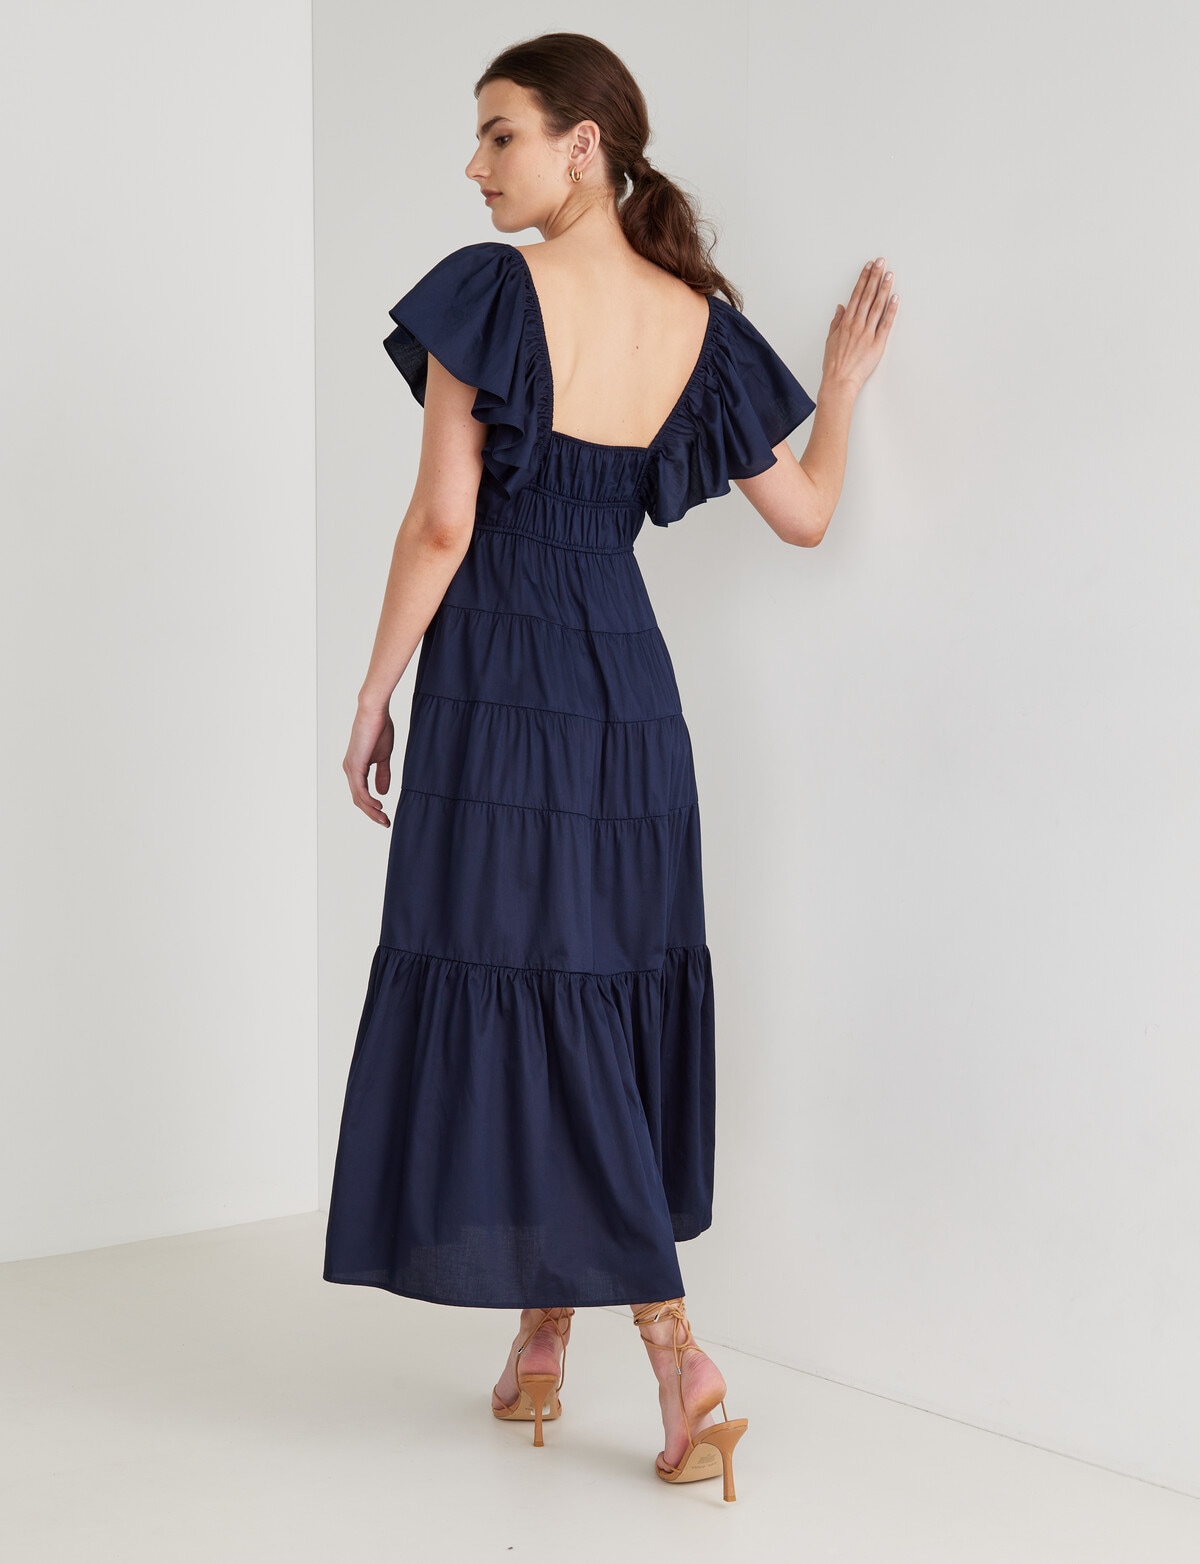 State of play Delilah Dress, Navy - Dresses